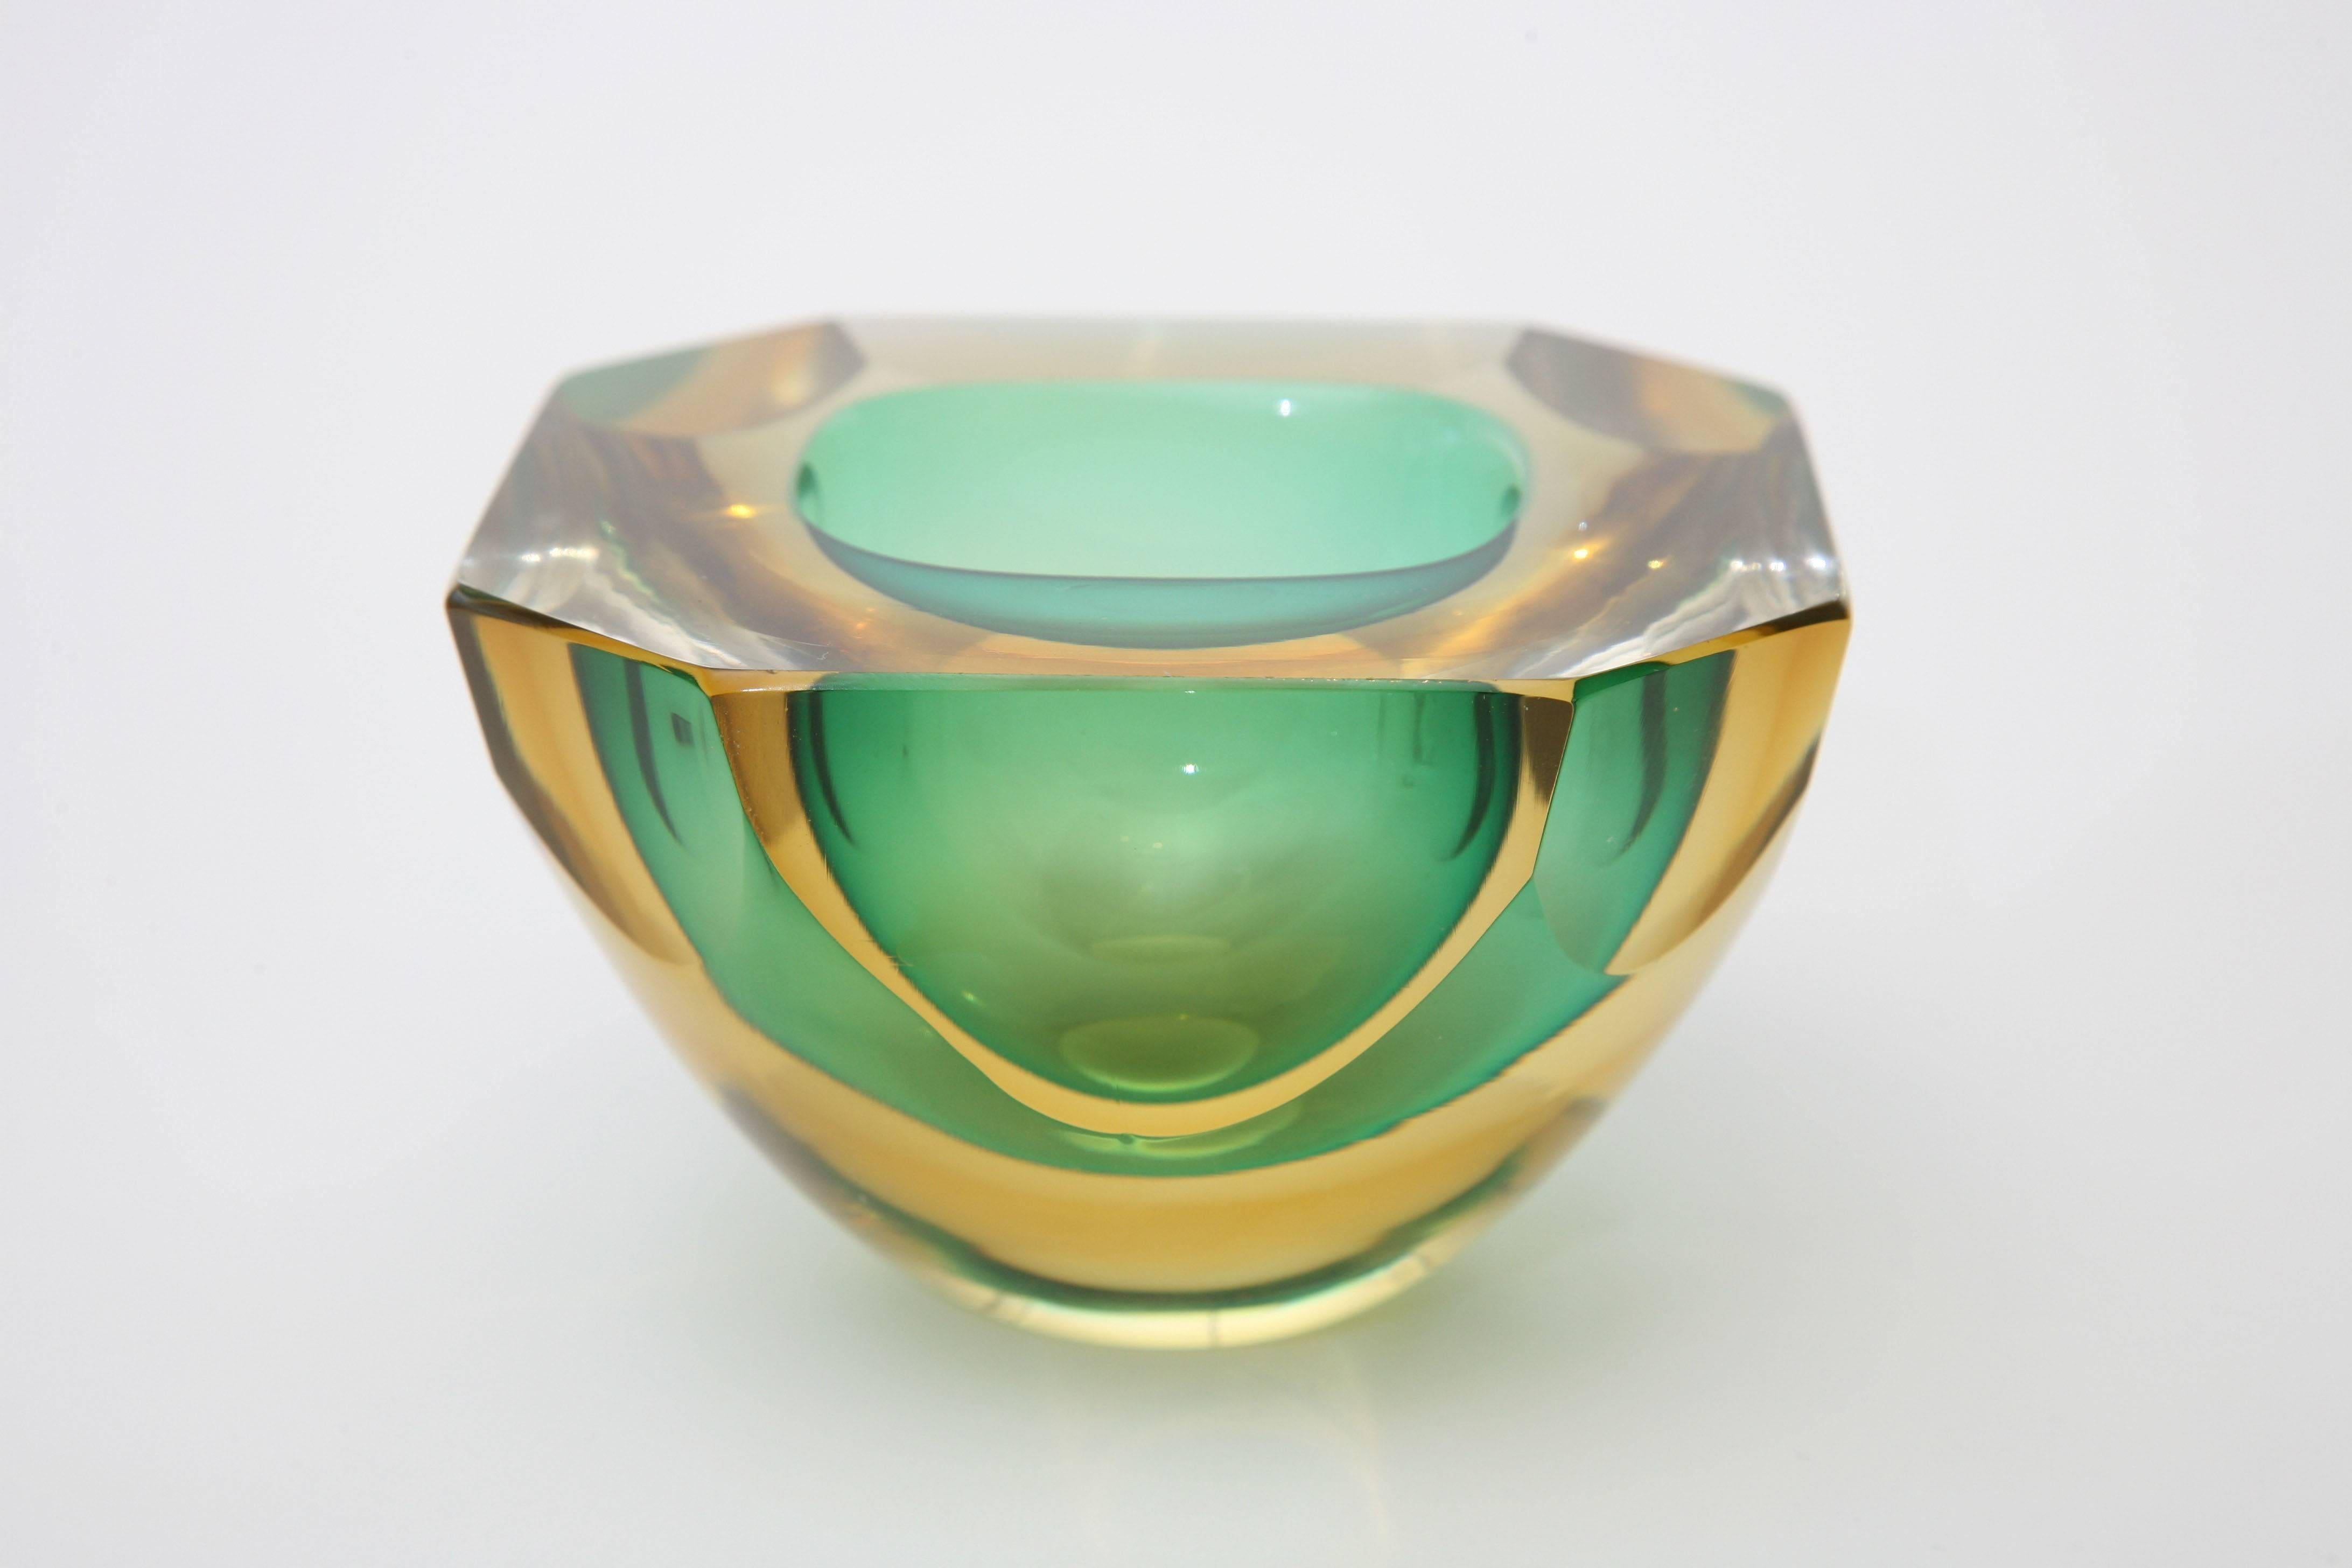 Lovely colors of Sommerso green to amber yellows are in this small Murano glass bowl that looks like a piece of sculpture.
It has a geode bowl with flat cut polished faceted sides and top.
Beautiful Murano glass!
Great for serving!